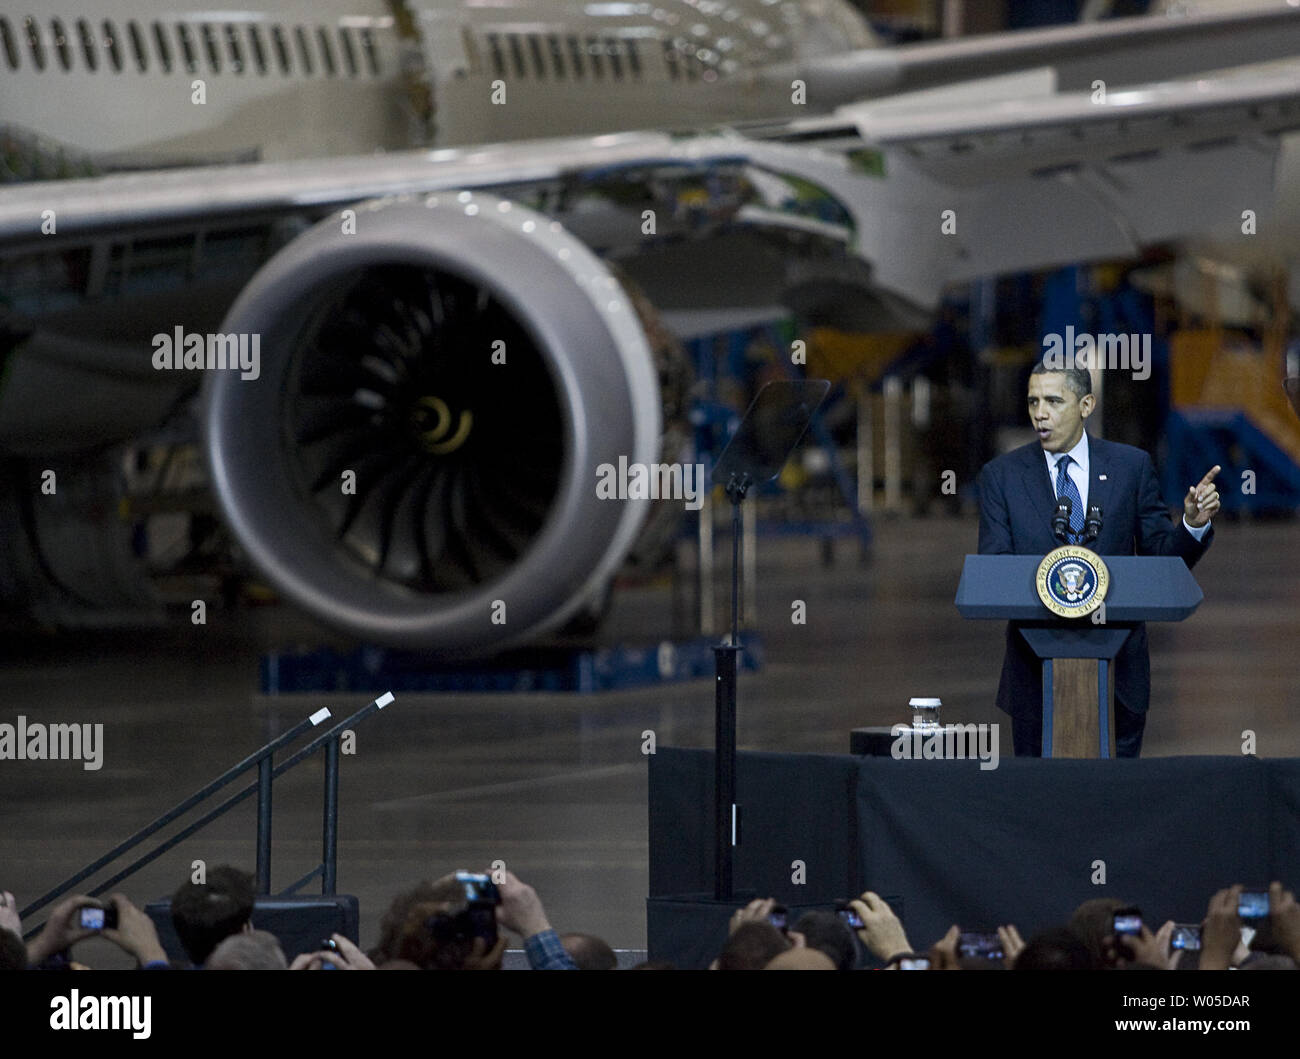 President Barack Obama talks to Boeing employees about his blueprint for an economy built to last, based on American domestic manufacturing and promoting American exports,  at the aerospace giant's assembly facility in Everett, Washington on February 17, 2012. Later Obama will be attending two fund raising events for his re-election campaign.   UPI/Jim Bryant Stock Photo